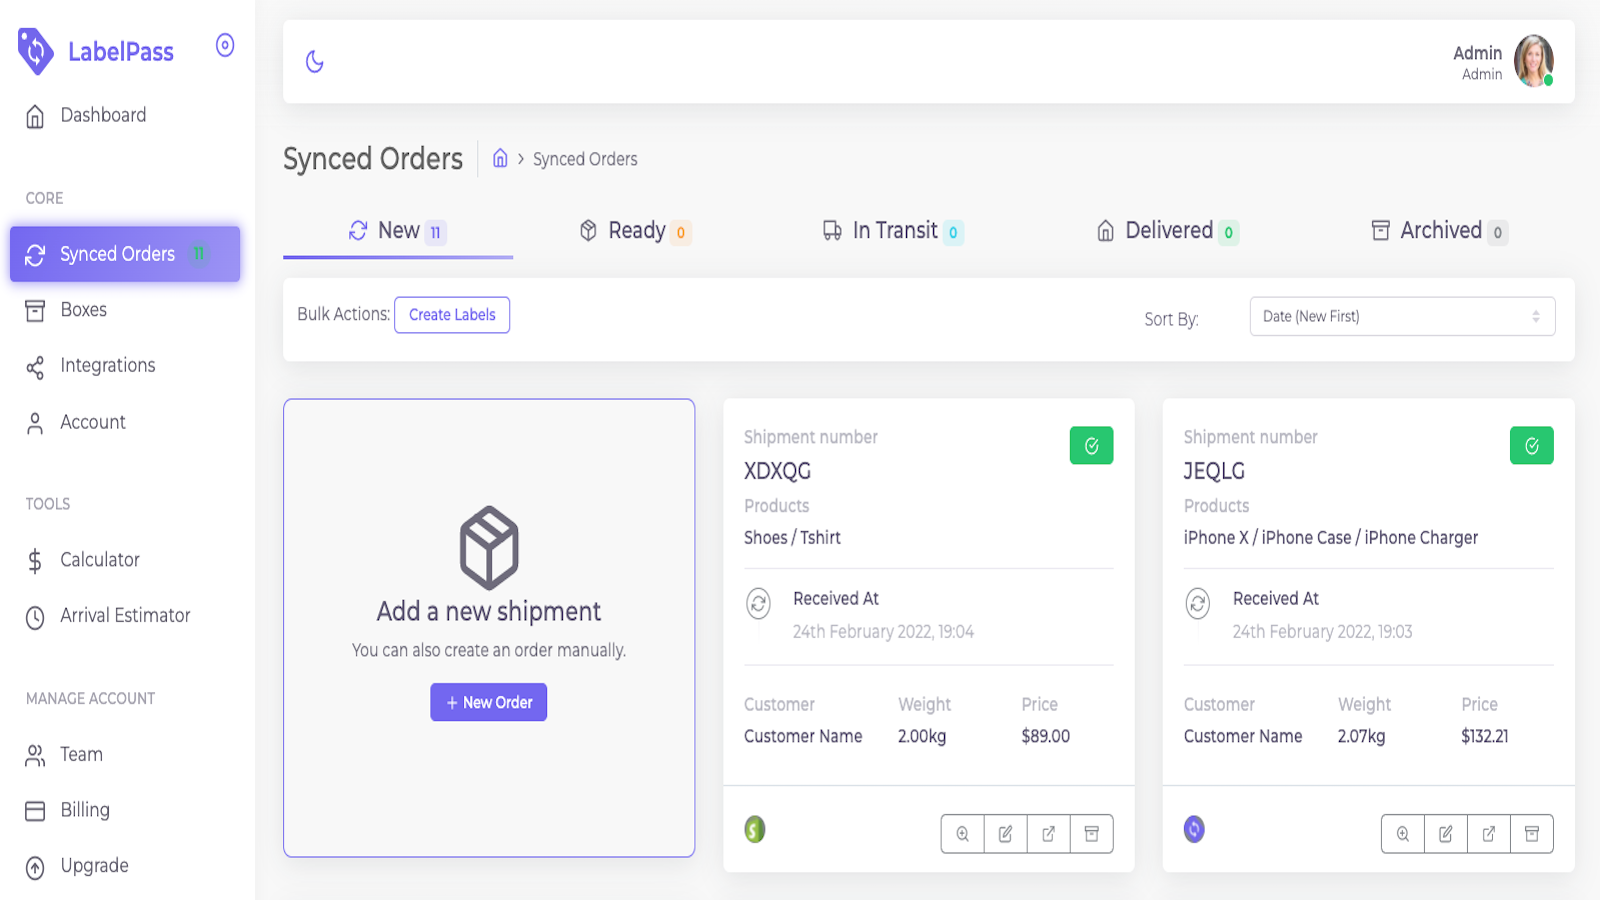 Manage your order in one dashboard